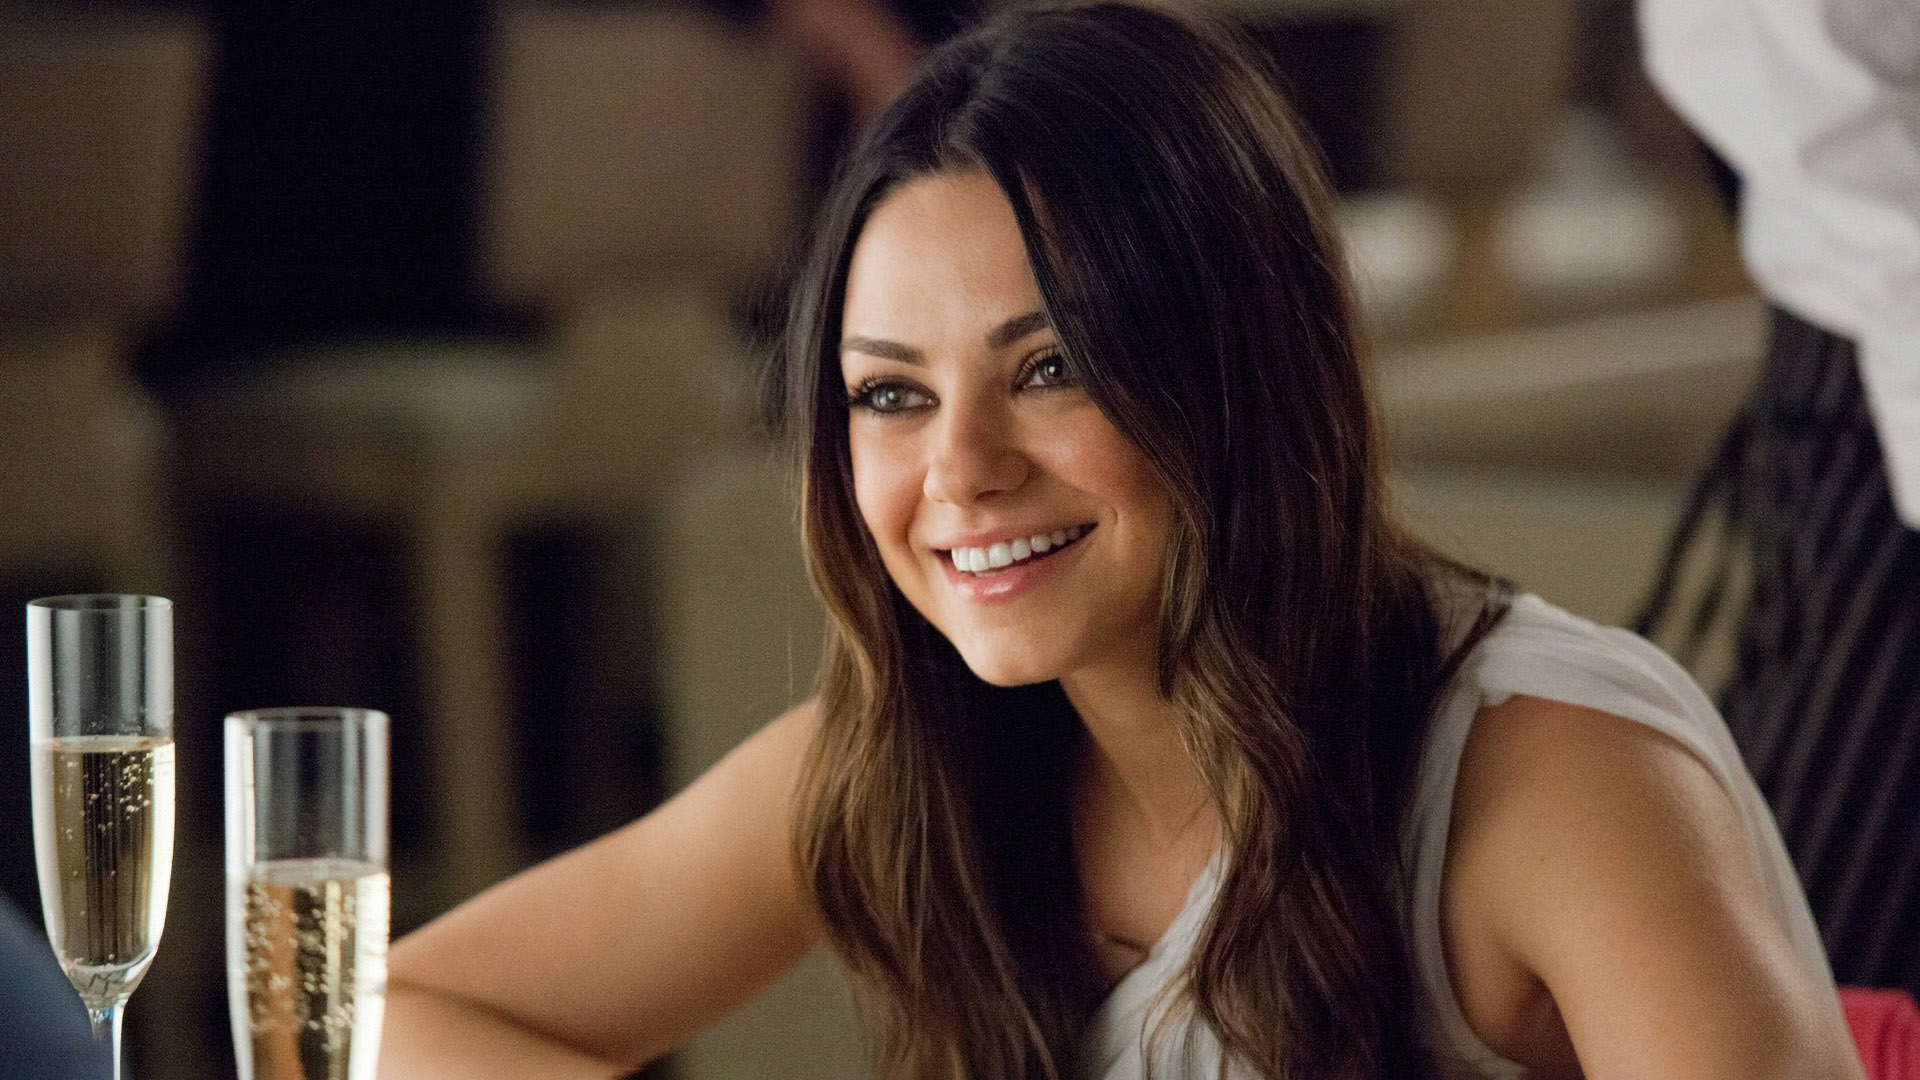 Mila Kunis Wasn't Supposed to Be in Ted, That's How She Got the Role